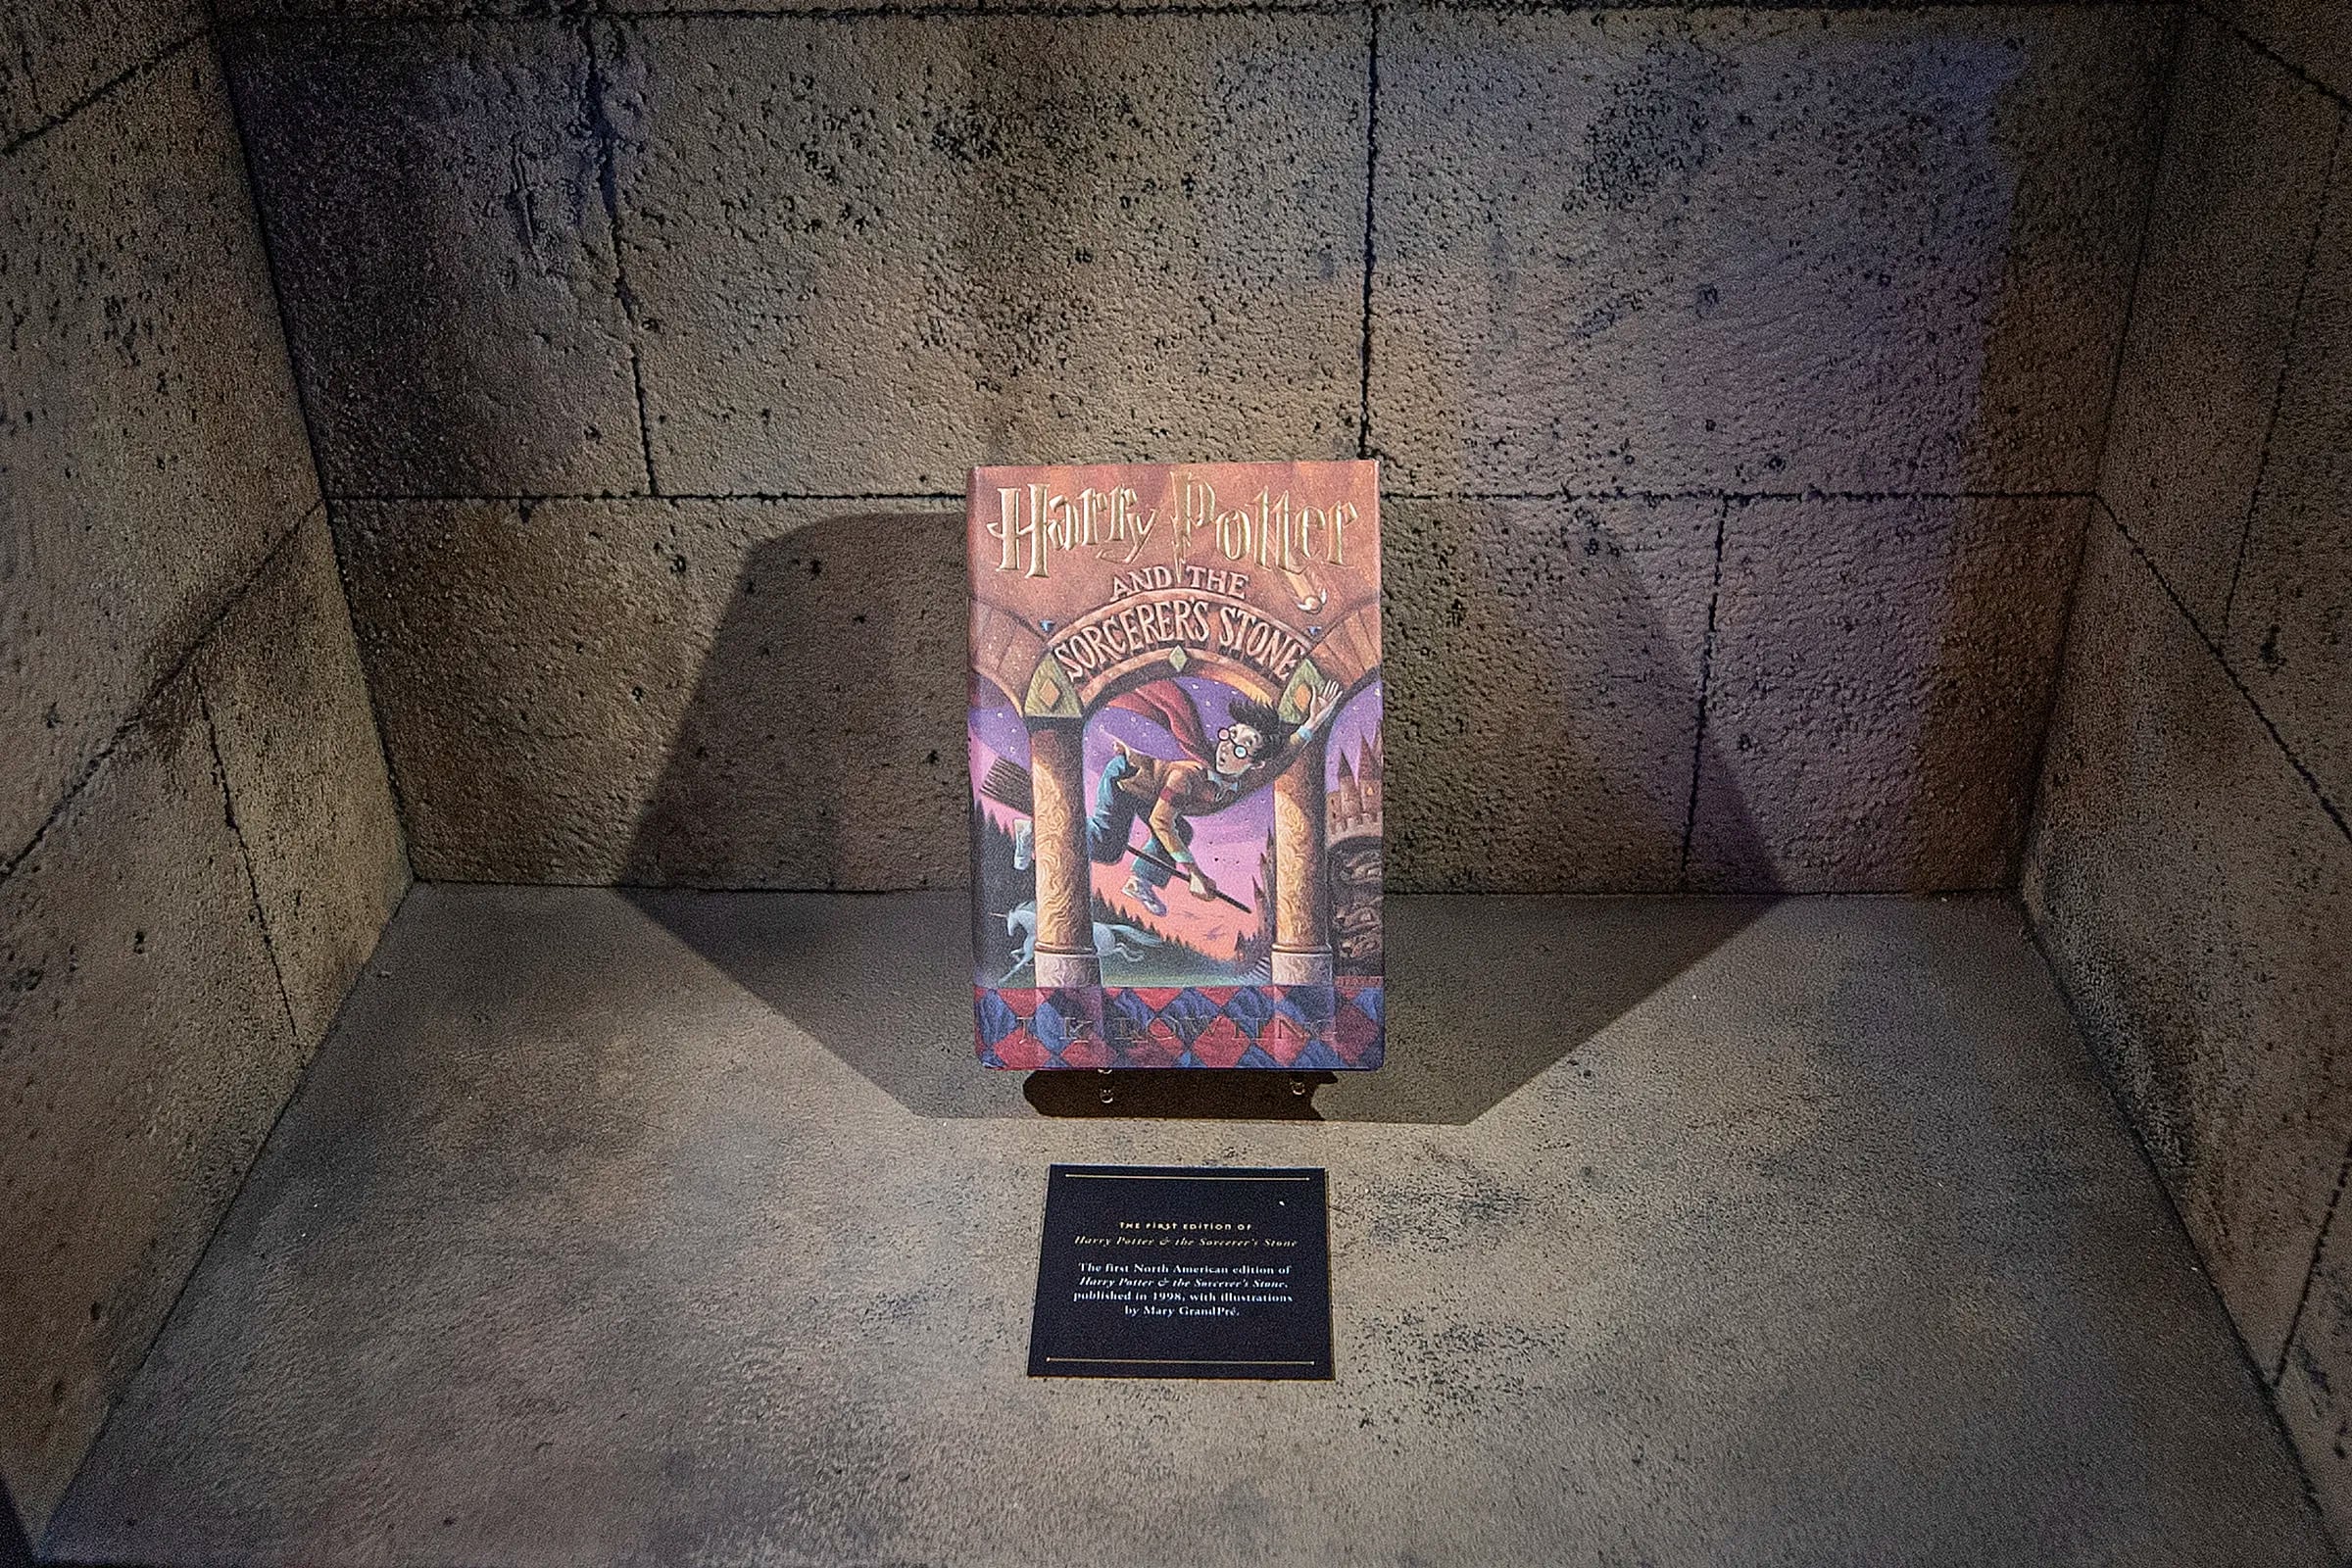 Complete Guide to Harry Potter: The Exhibition in Philadelphia